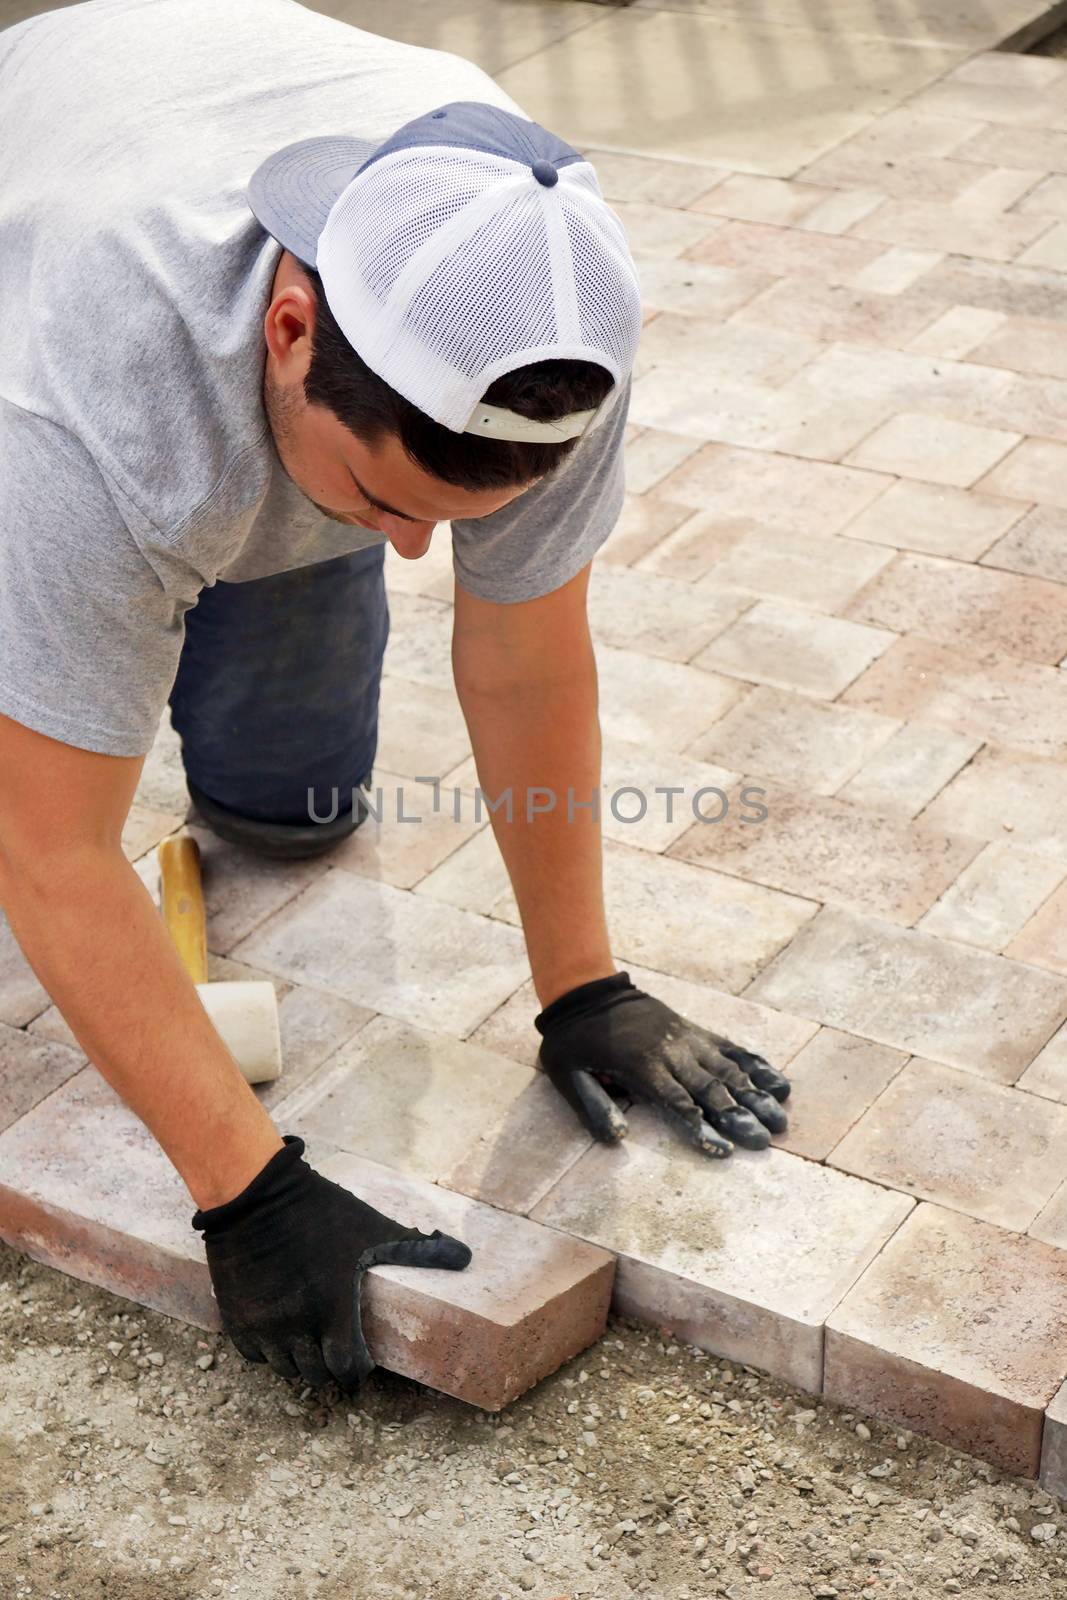 Paver stone landscaping by Mirage3